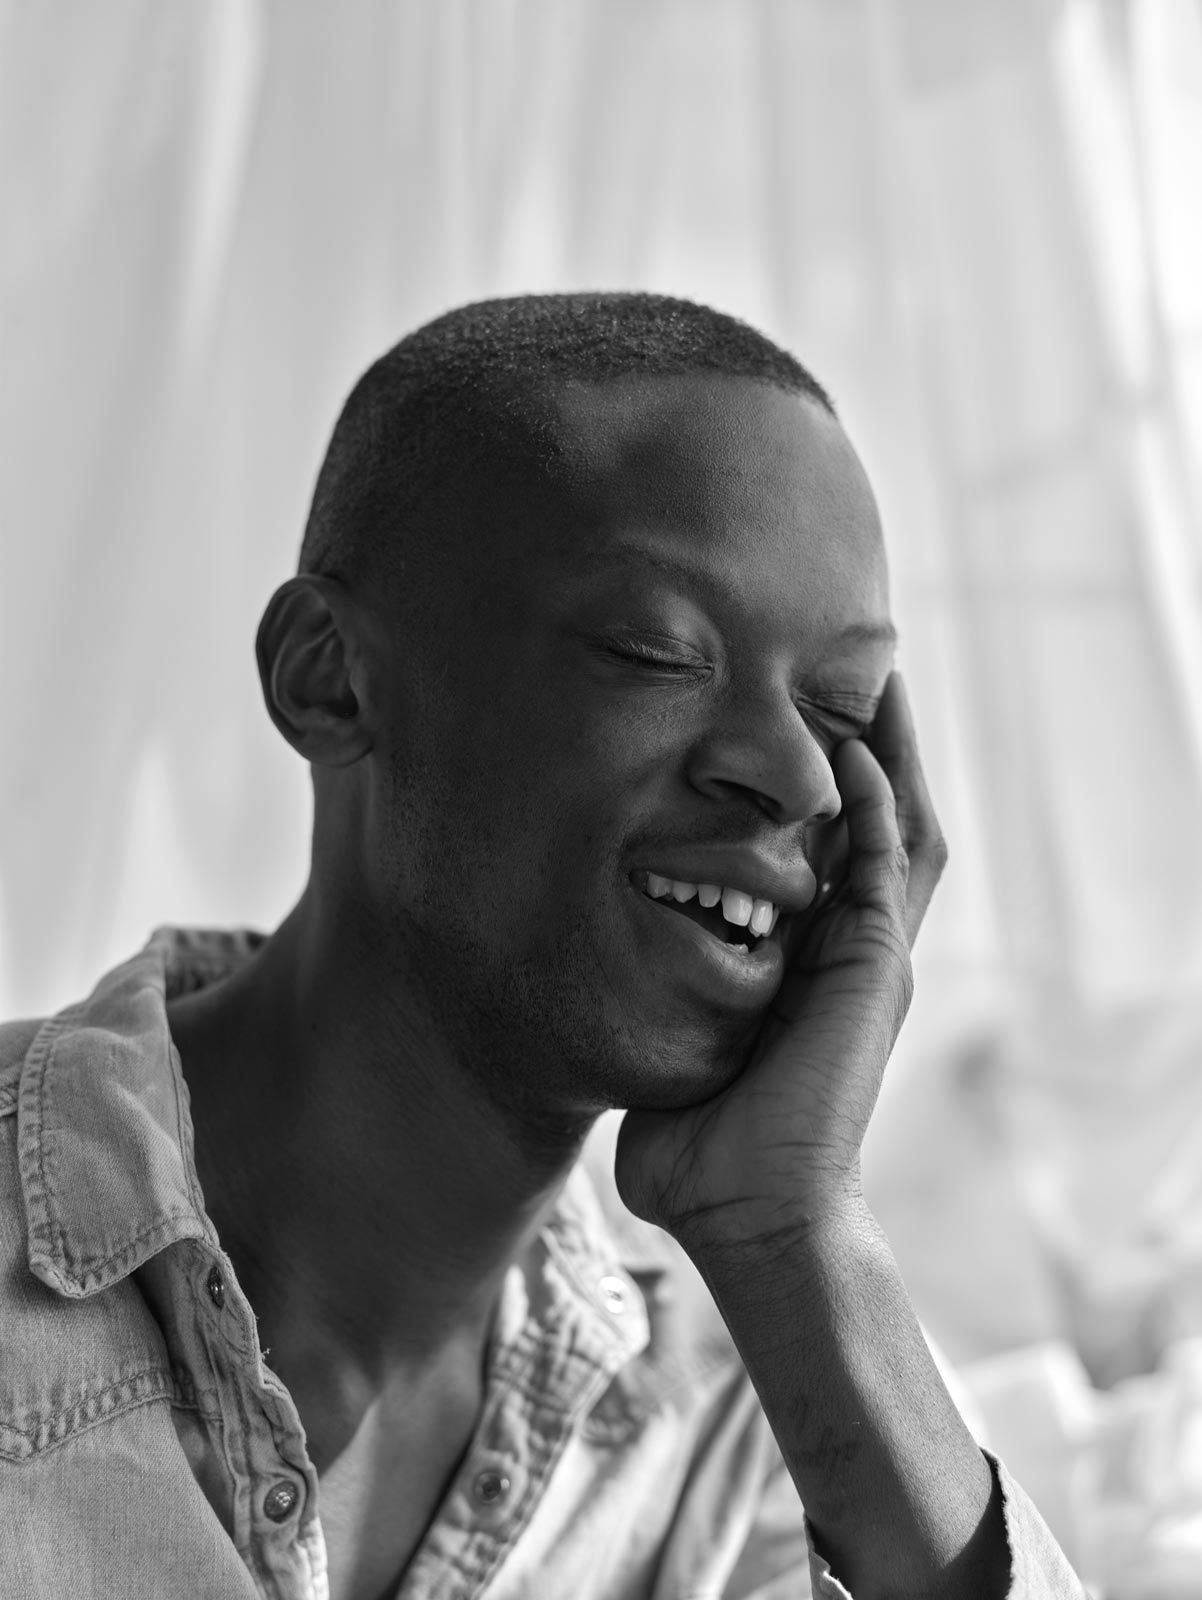 Male fashion model caught laughing during a portrait shoot, black and white photography.